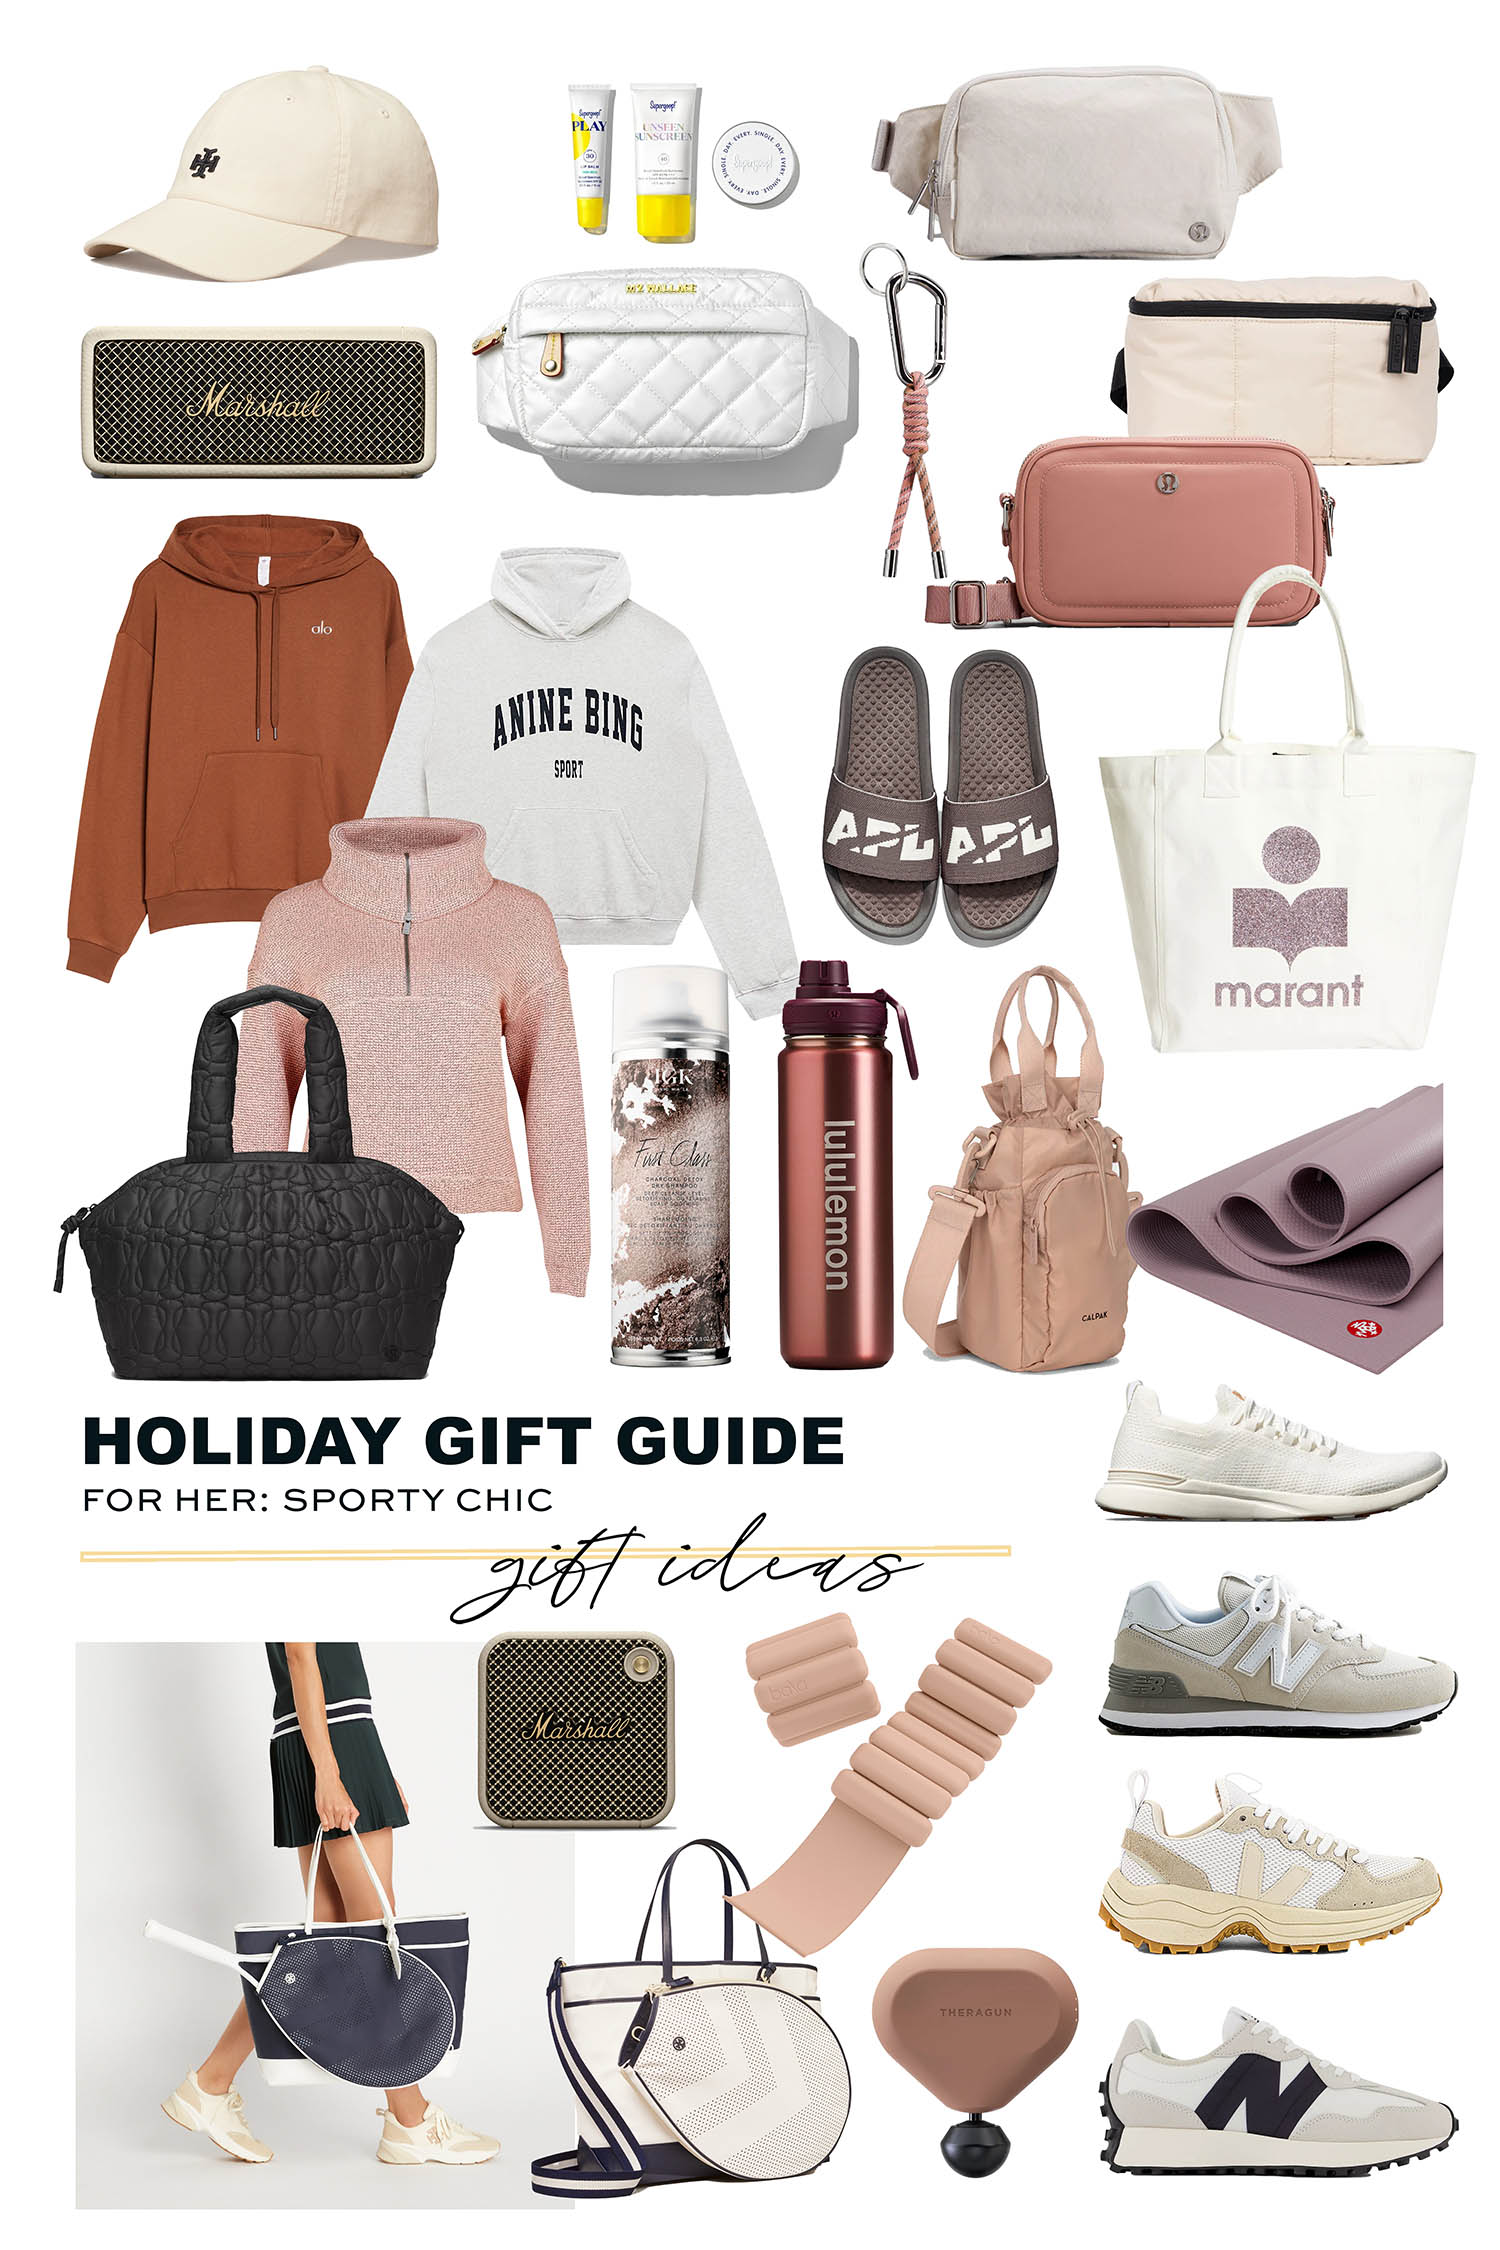 Holiday Gift Guide: 68 Ideas for Everyone on Your List - Shopify